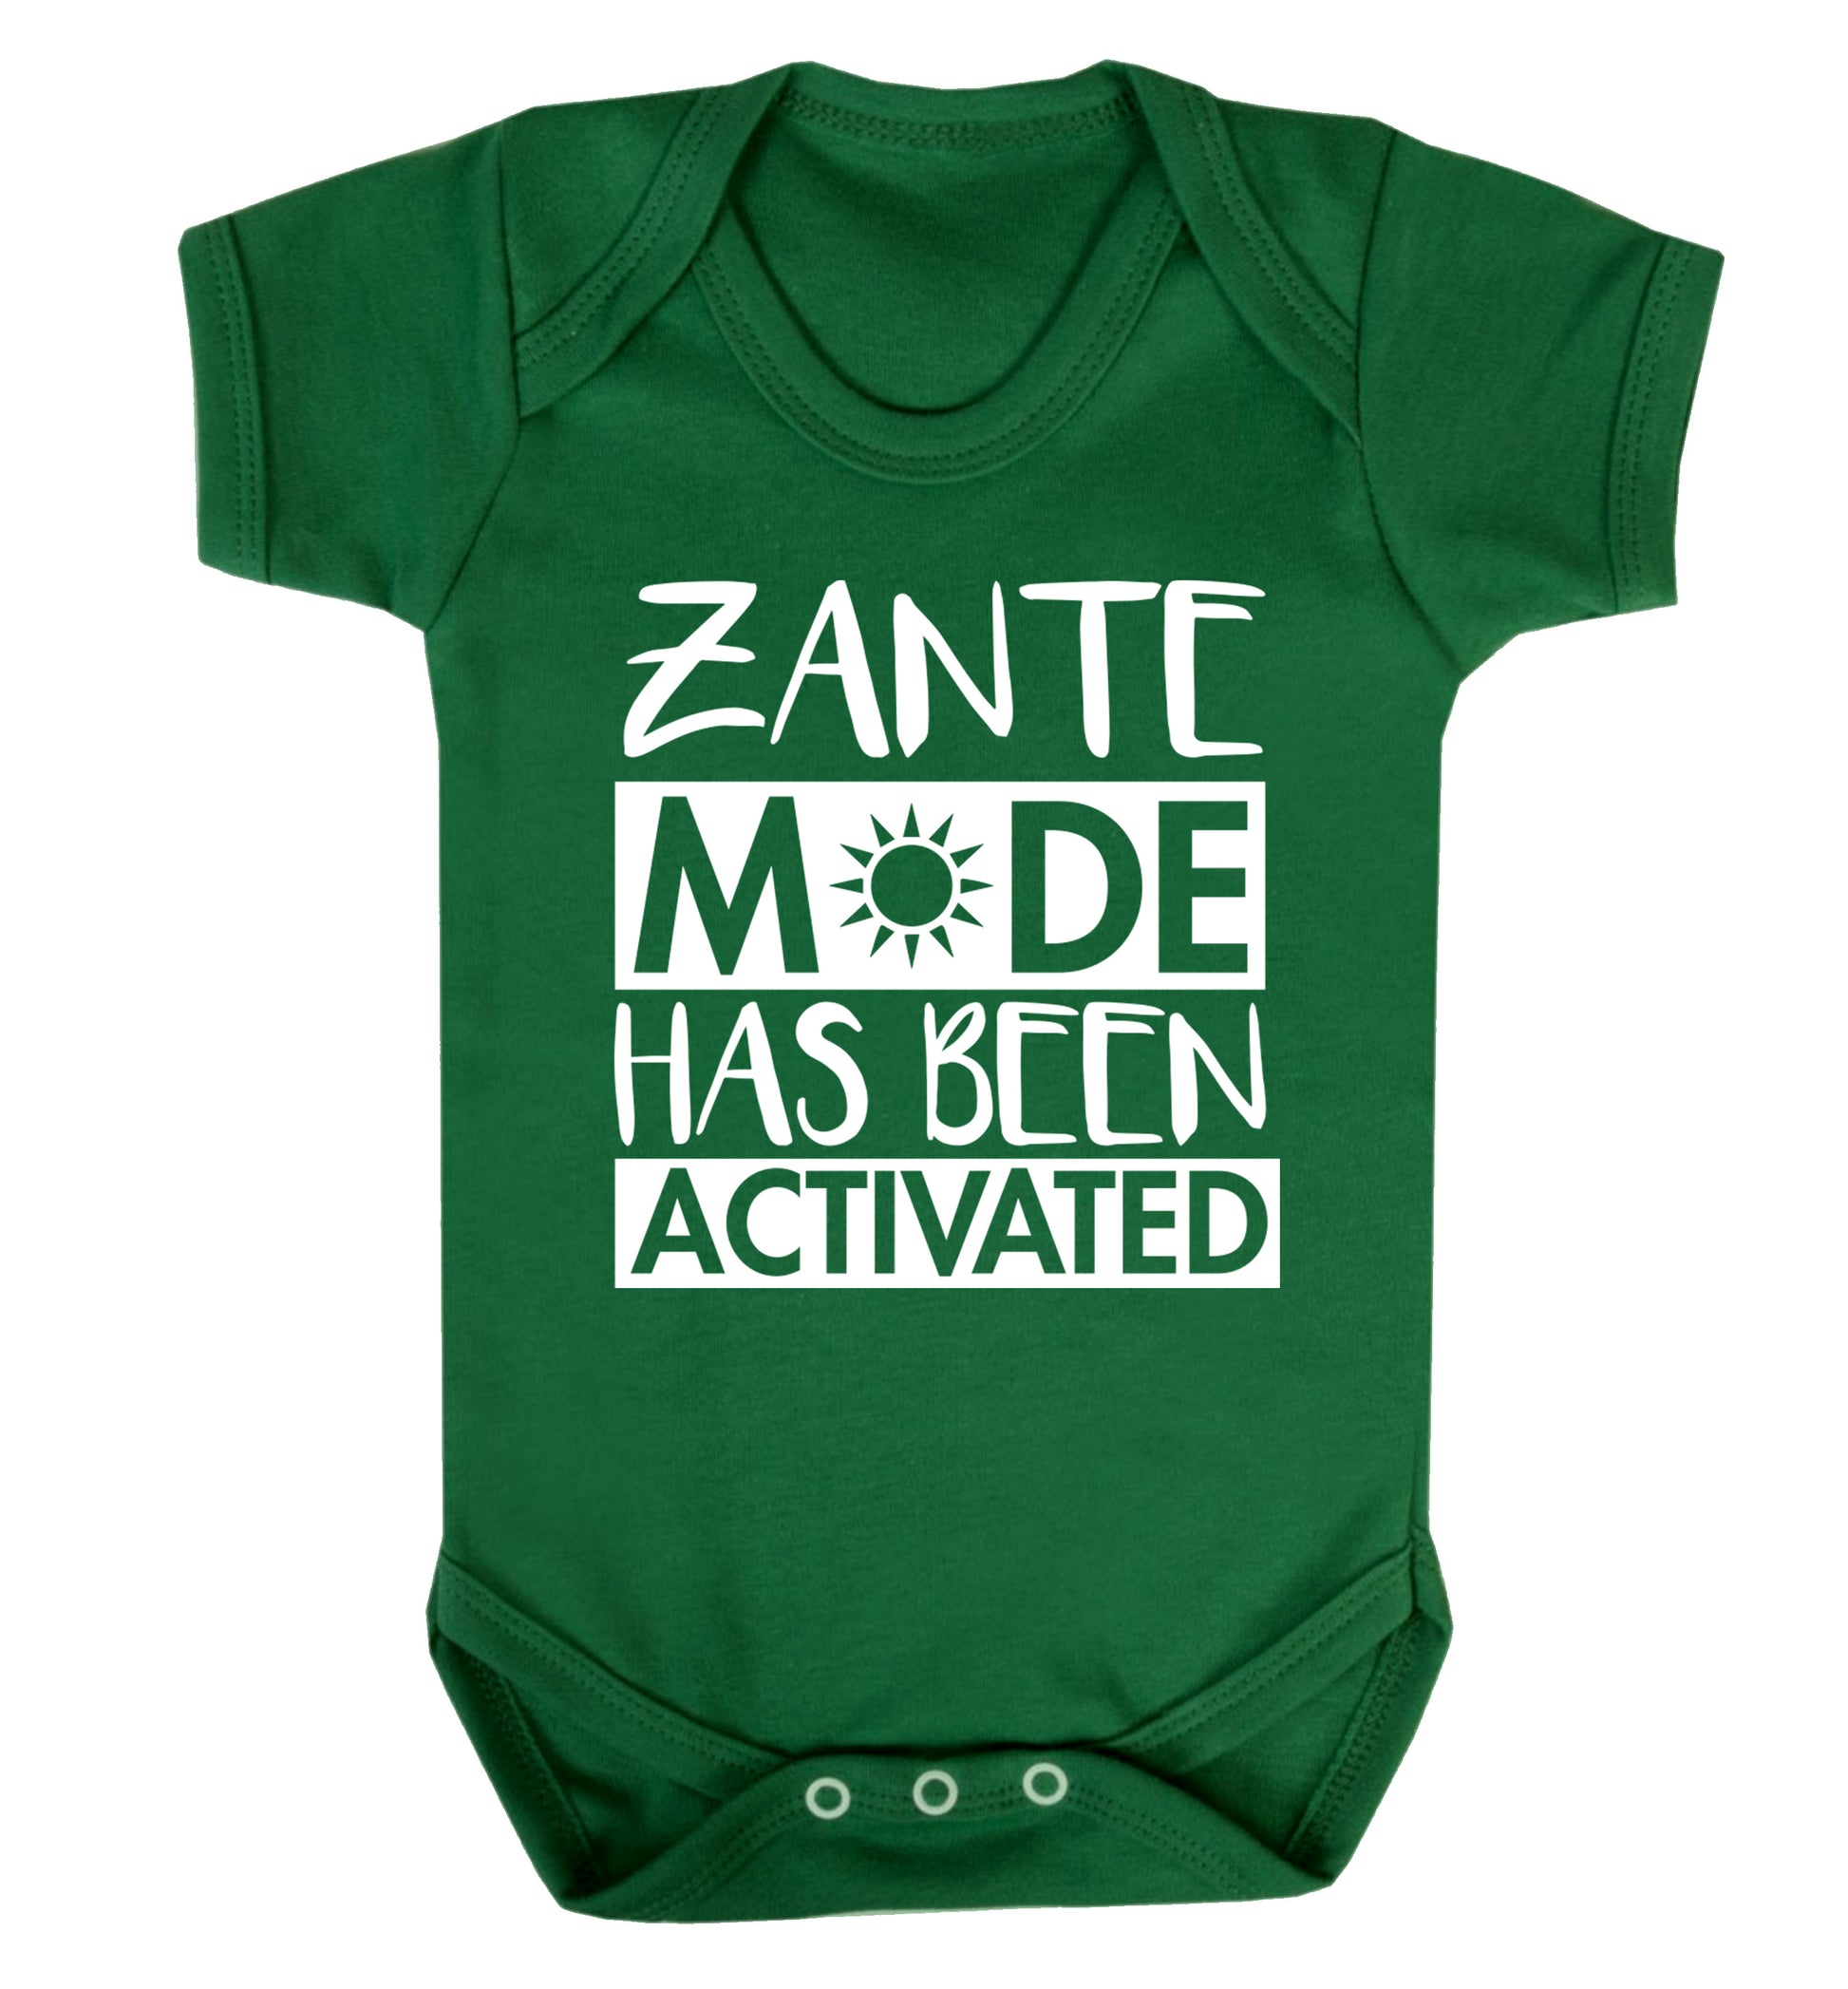 Zante mode has been activated Baby Vest green 18-24 months